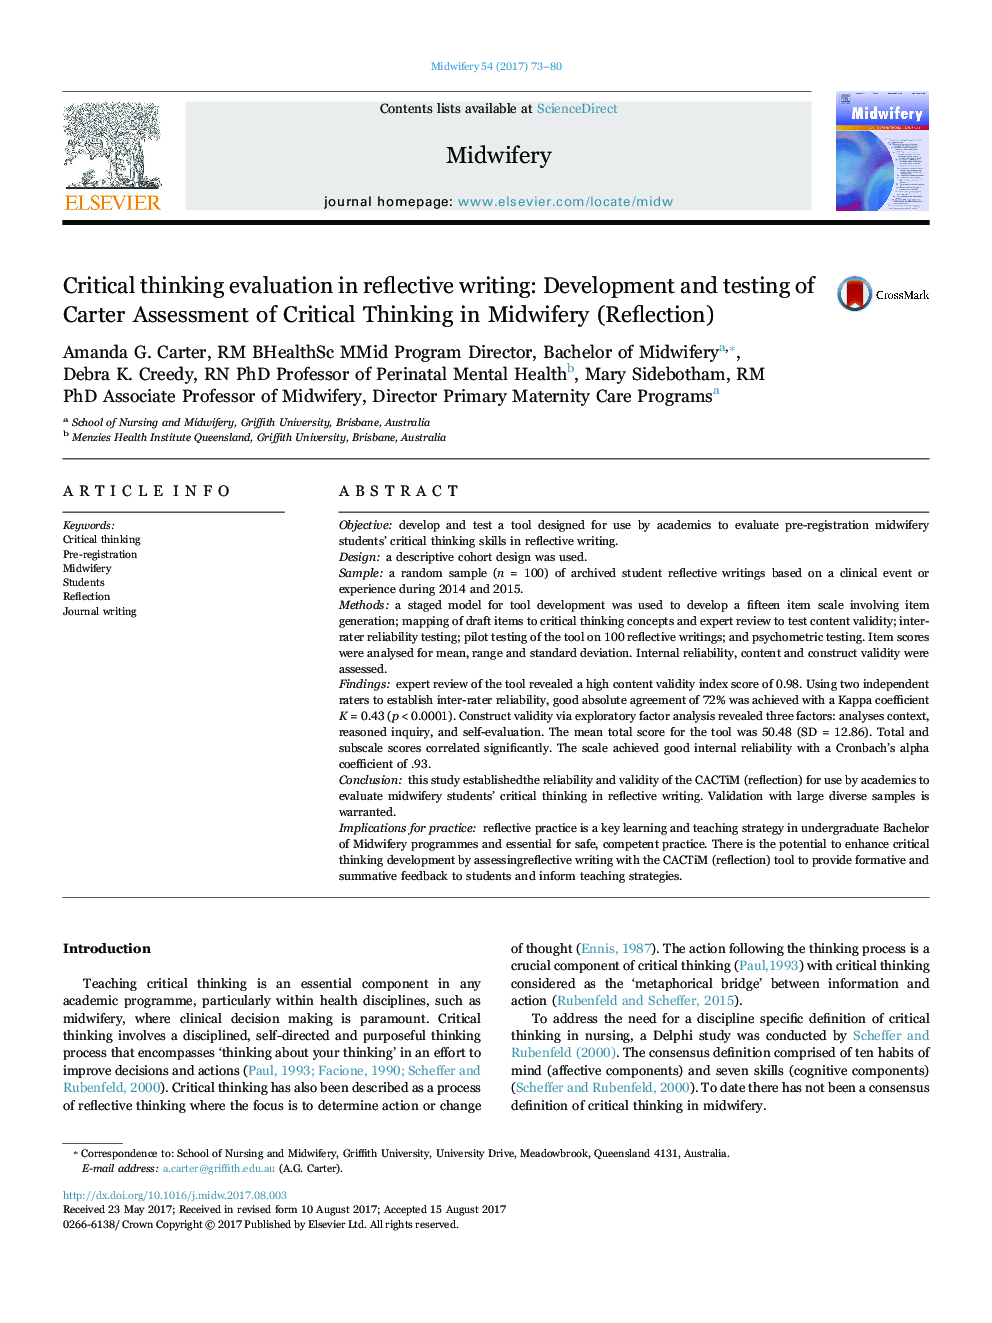 Critical thinking evaluation in reflective writing: Development and testing of Carter Assessment of Critical Thinking in Midwifery (Reflection)